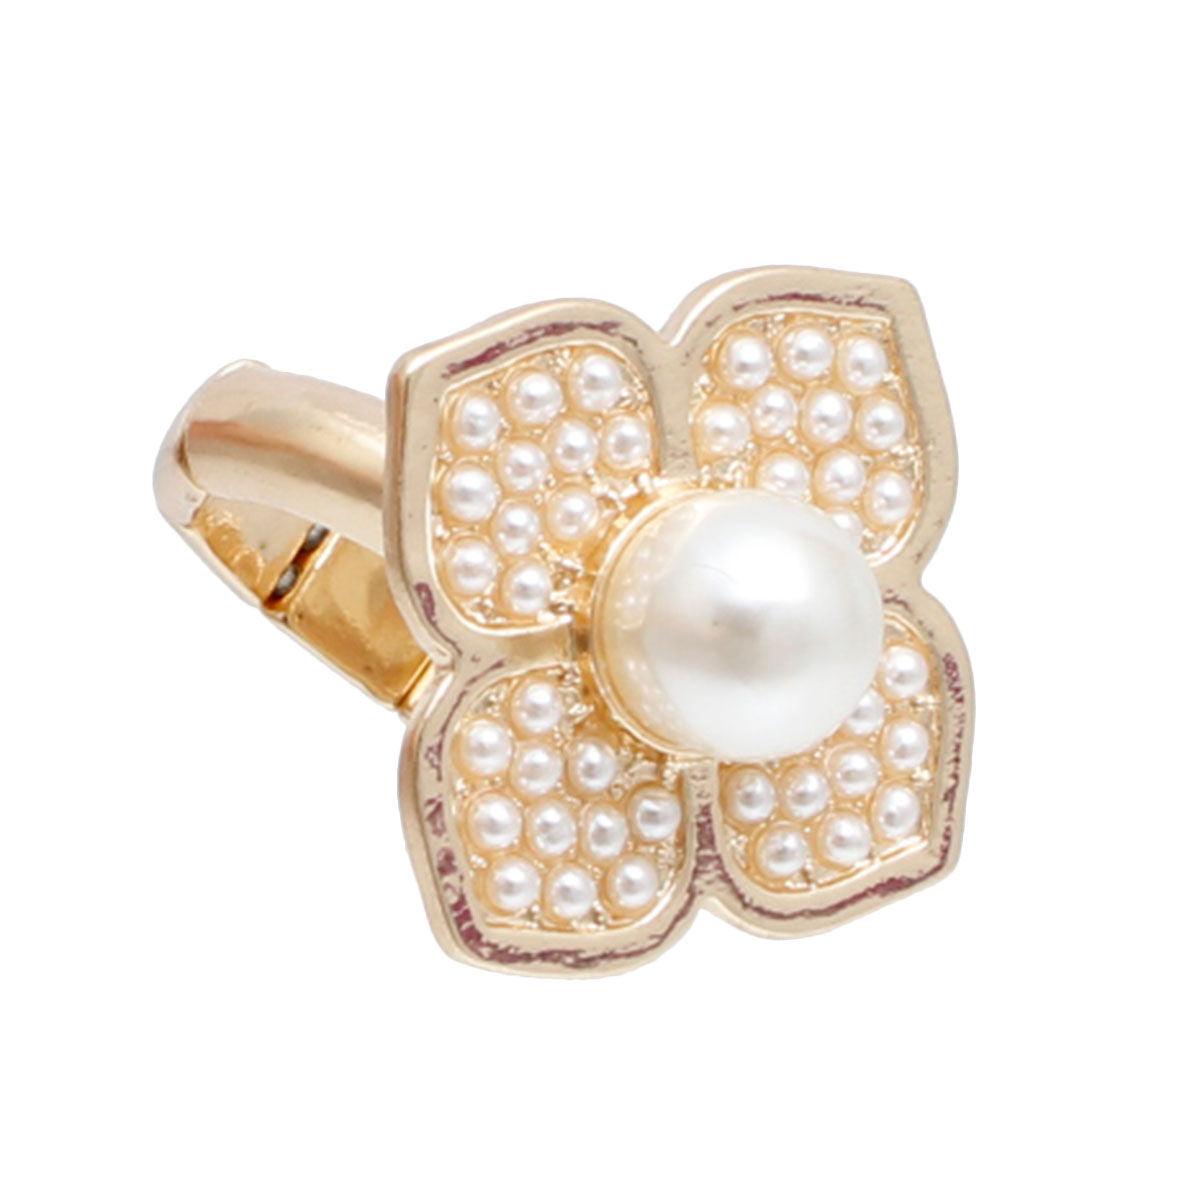 Elegance in Bloom: Gold Flower Ring with Cream Pearl - Fashion Jewelry